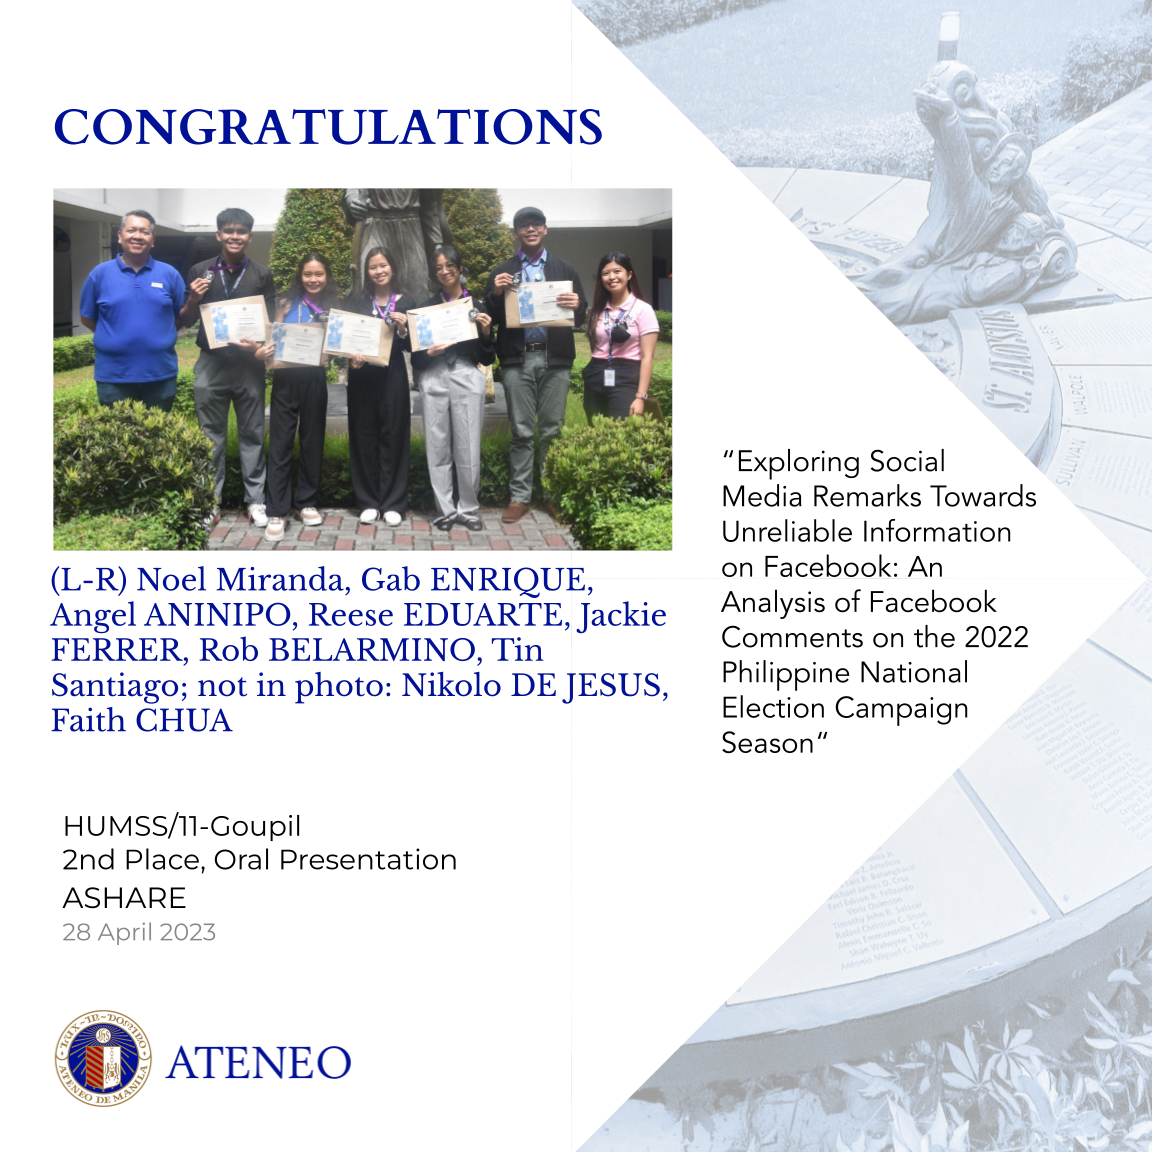 8)	"Exploring Social Media Remarks Towards Unreliable Information on Facebook: An Analysis of Facebook Comments on the 2022 Philippine National Election Campaign Season" by Aninipo, Belarmino, Chua, De Jesus, Eduarte, Enrique, and Ferrer